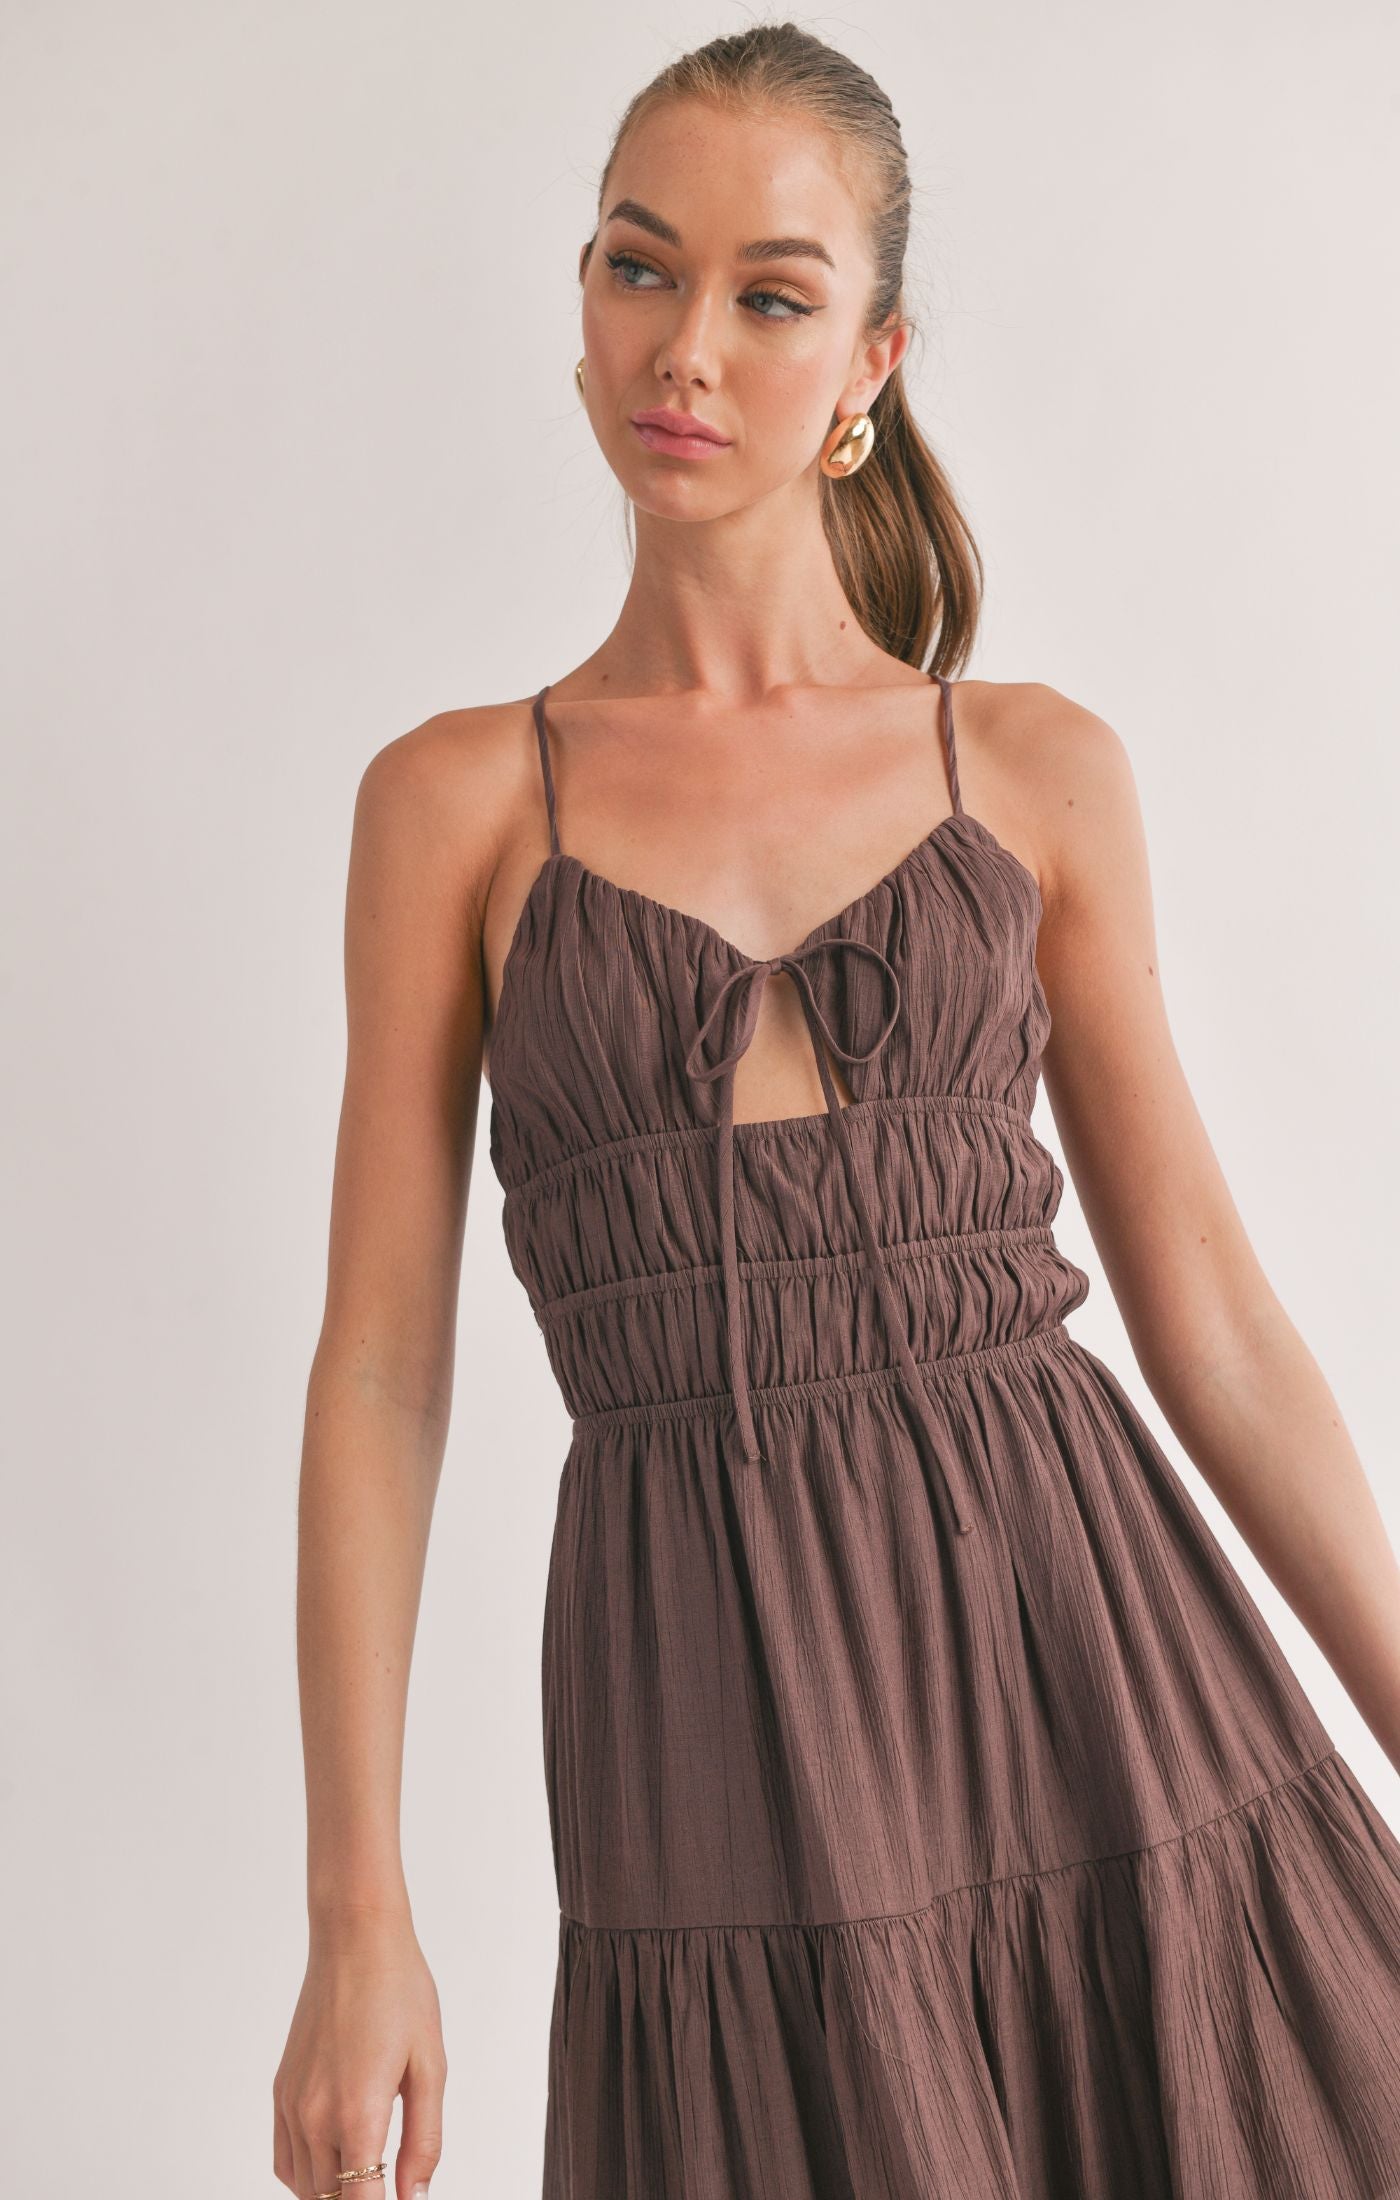 Sage the Label - Light a Fire Tiered Maxi Dress